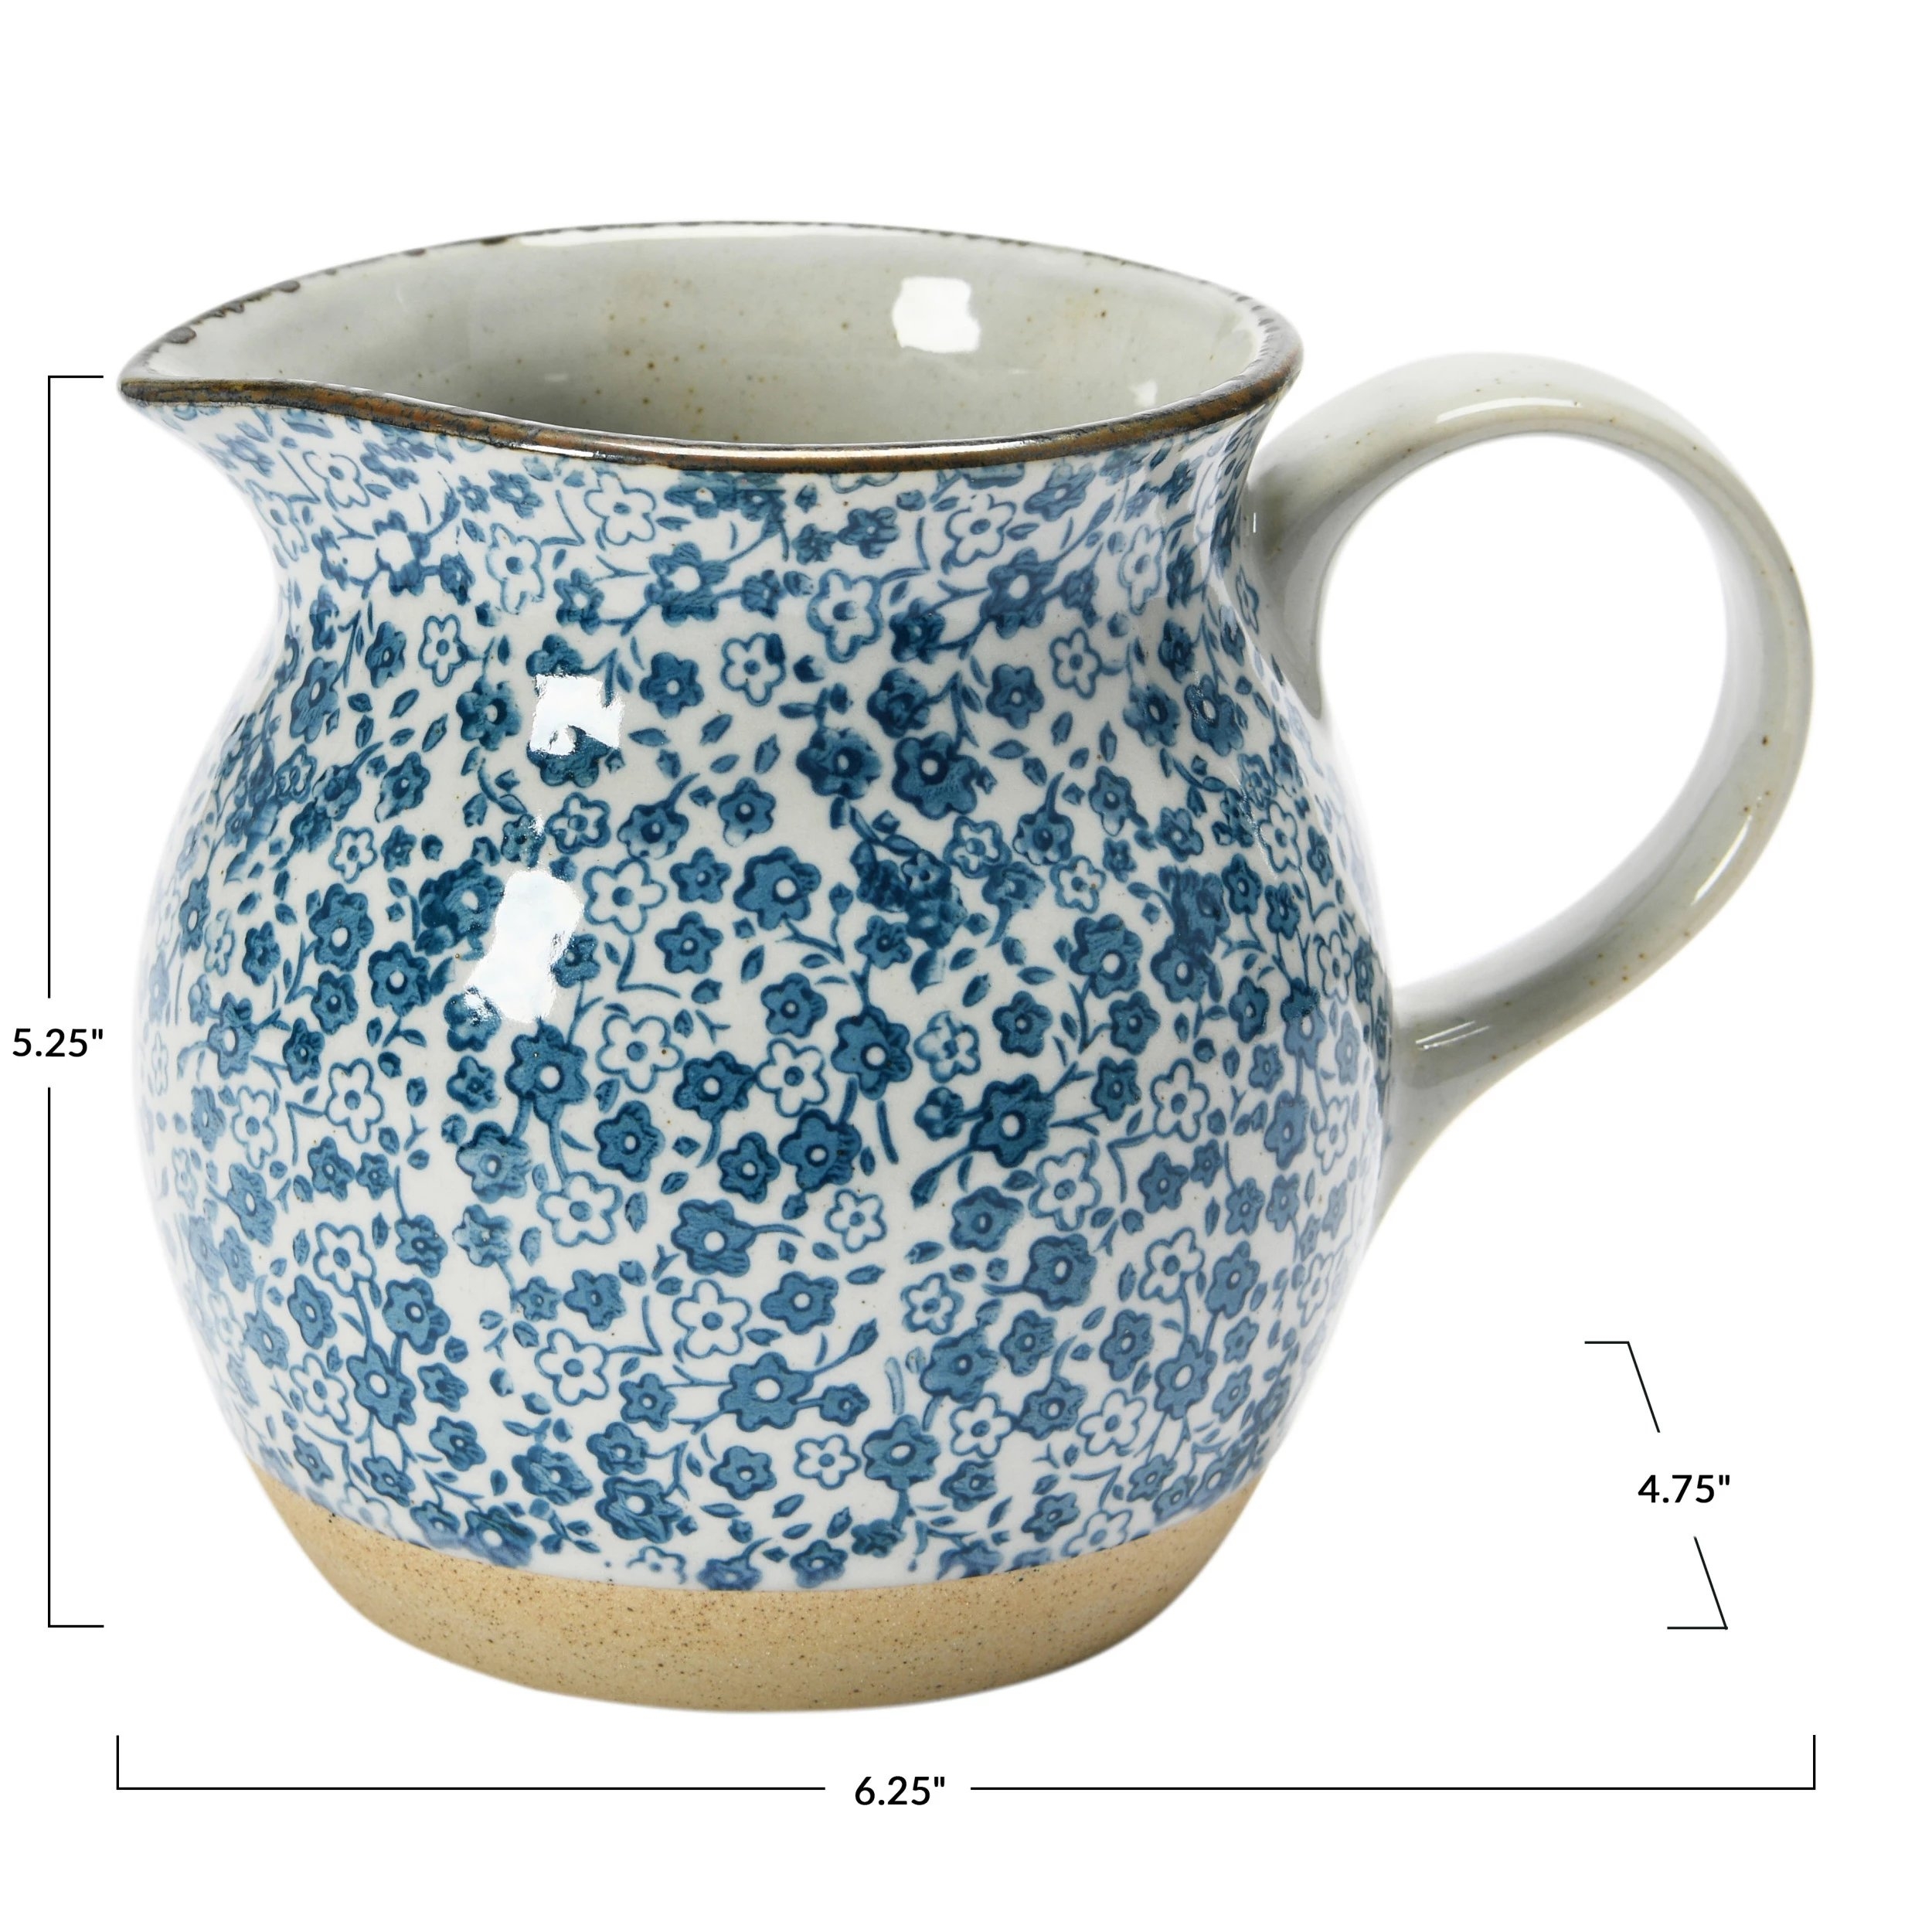 Hand-Painted Country-Style Stoneware Pitcher with Floral Print - Image 3